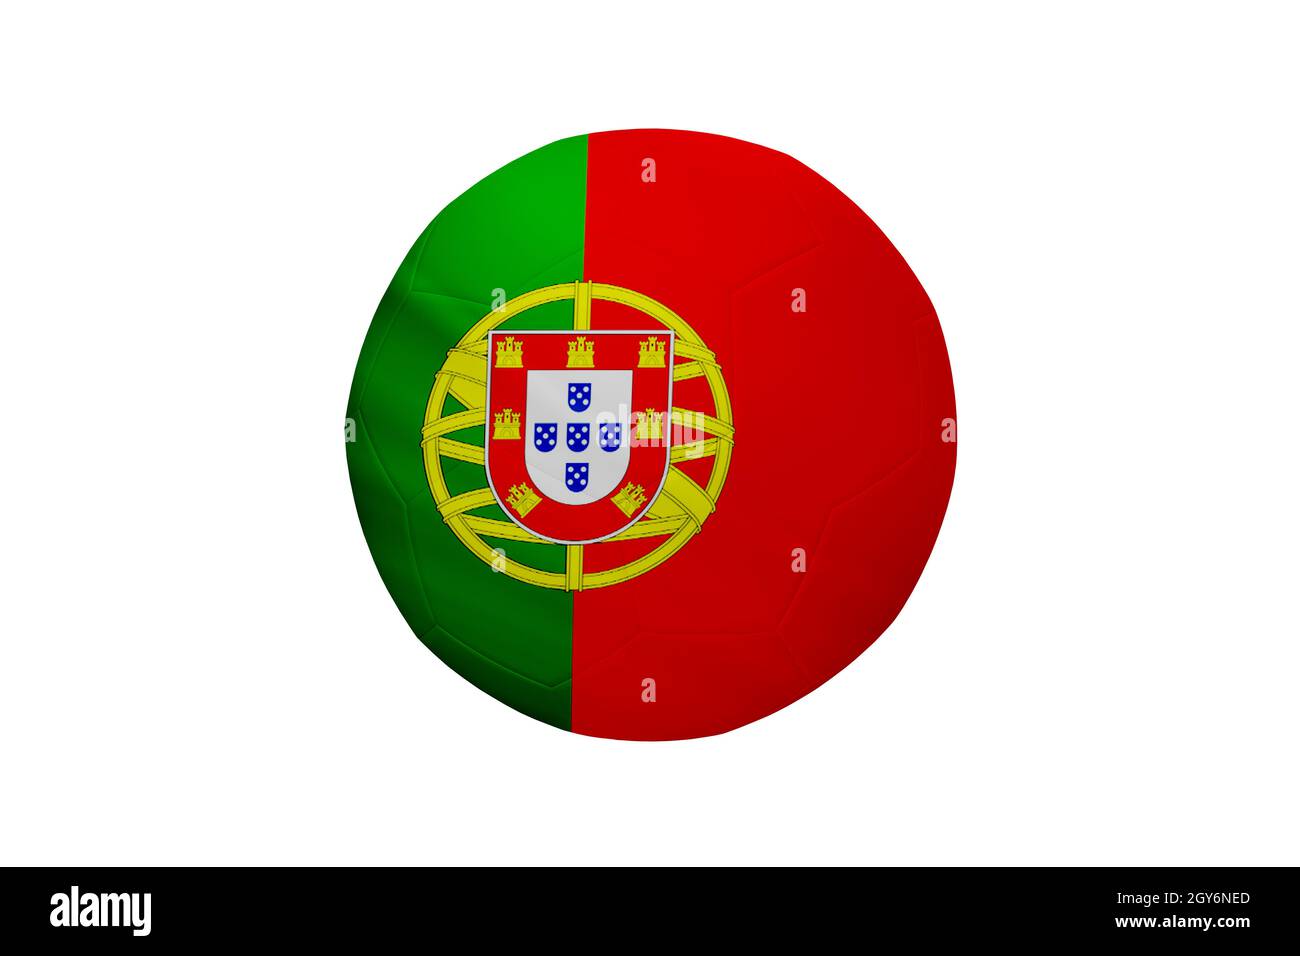 Football in the colors of the Portugal flag isolated on white background. In a conceptual championship image supporting Portugal. Stock Photo